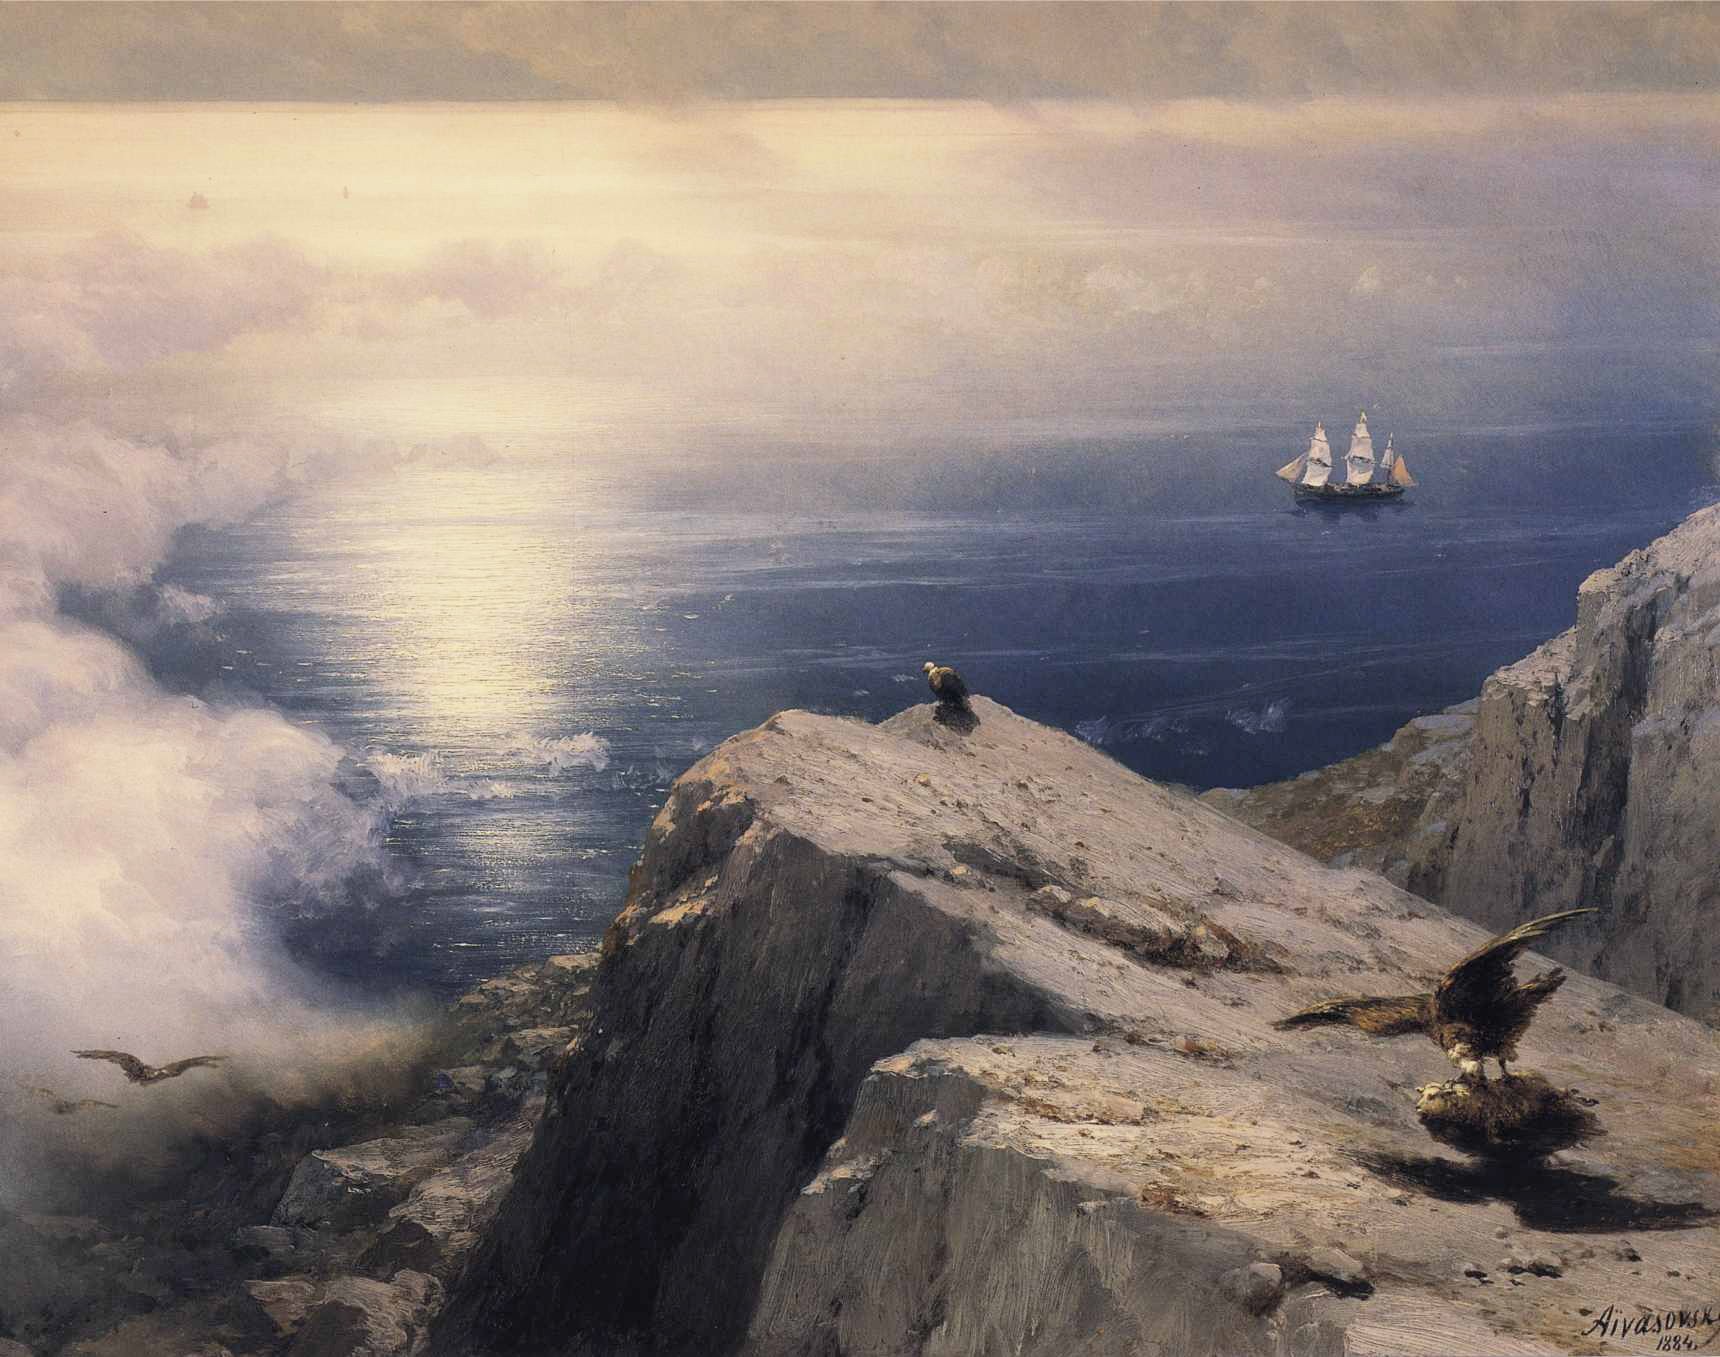 art, Rocky coastal landscape in the aegean with ships in the distance Wallpaper